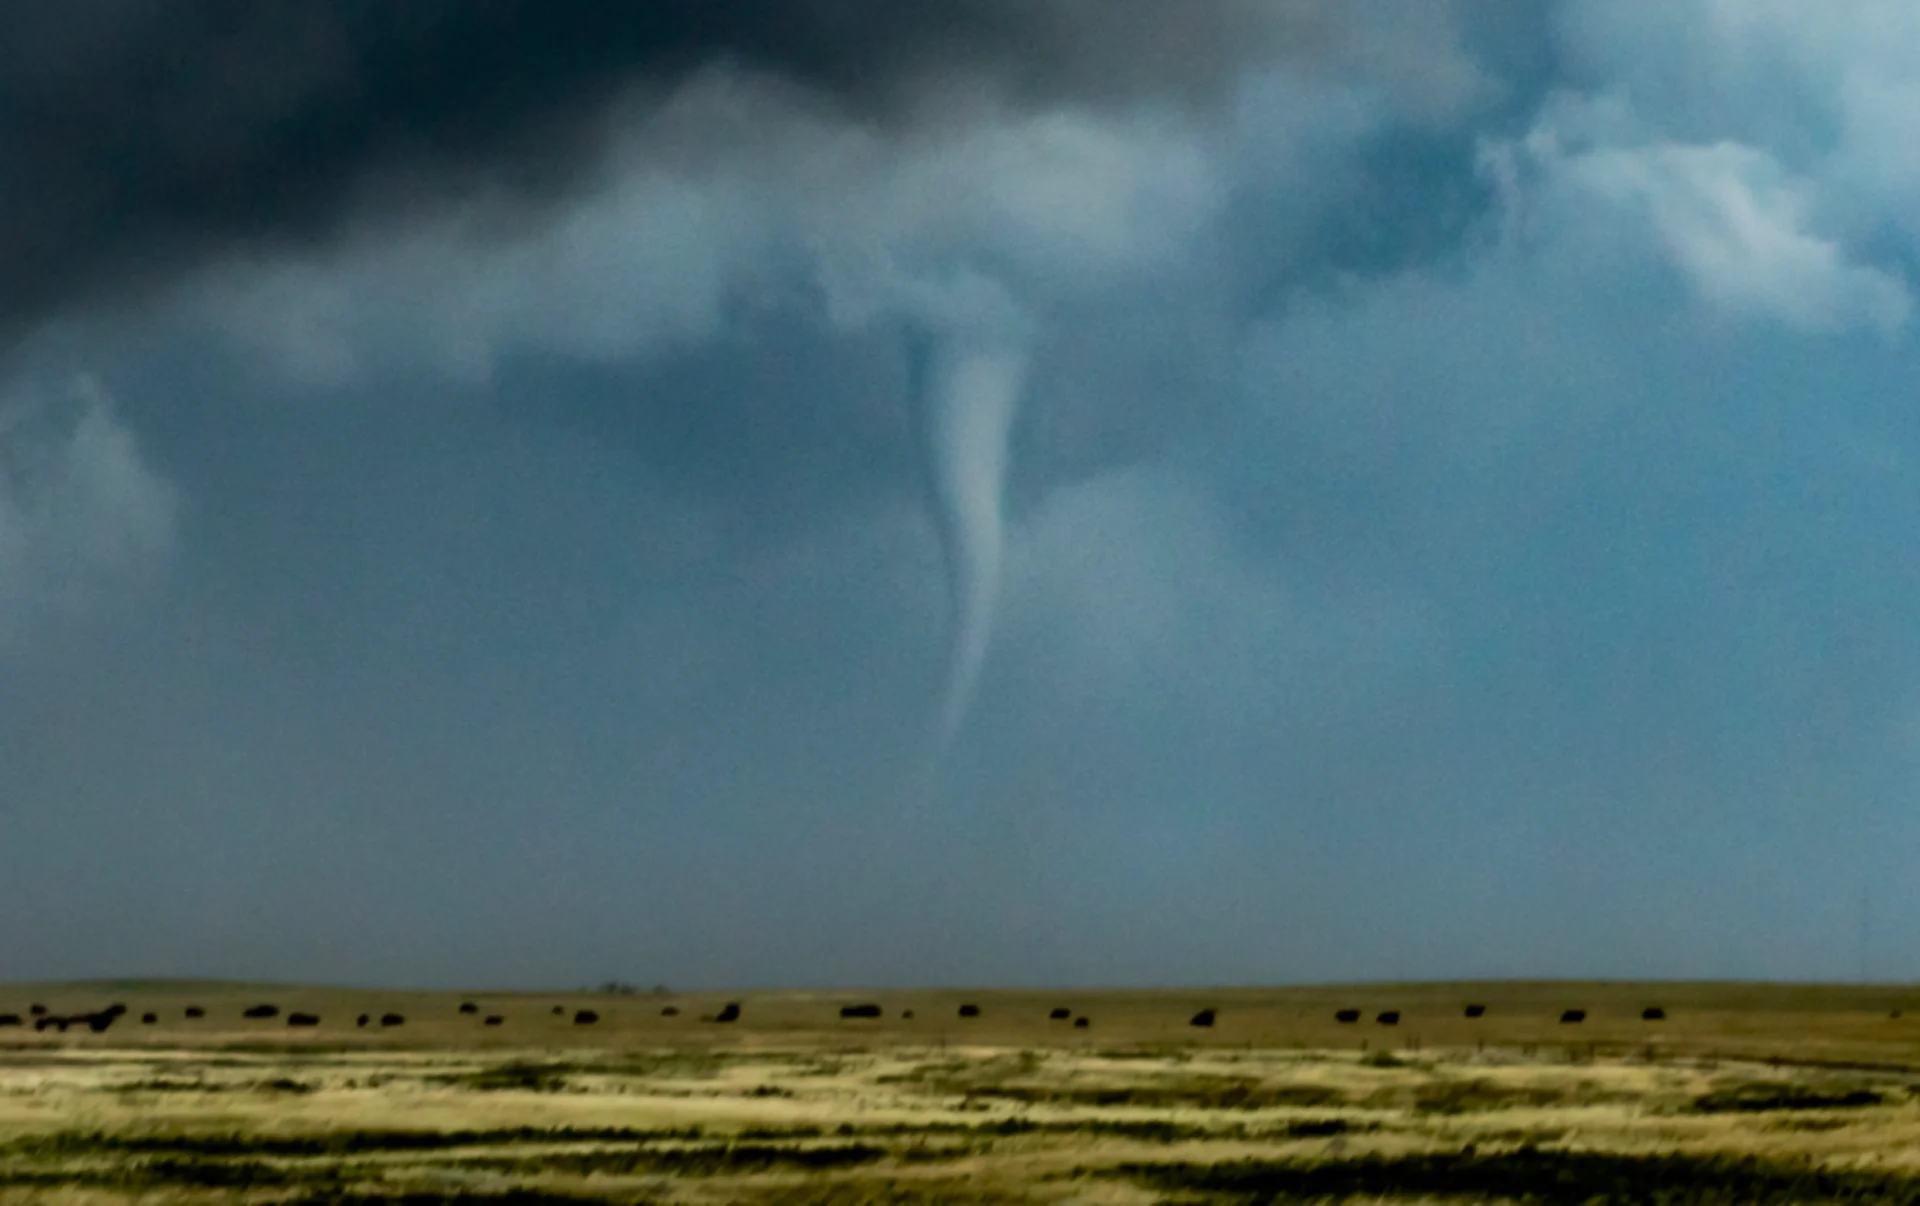 This powerful storm unleashed an extremely rare ‘clockwise’ tornado. That wasn’t even the strangest part of this unusual twister